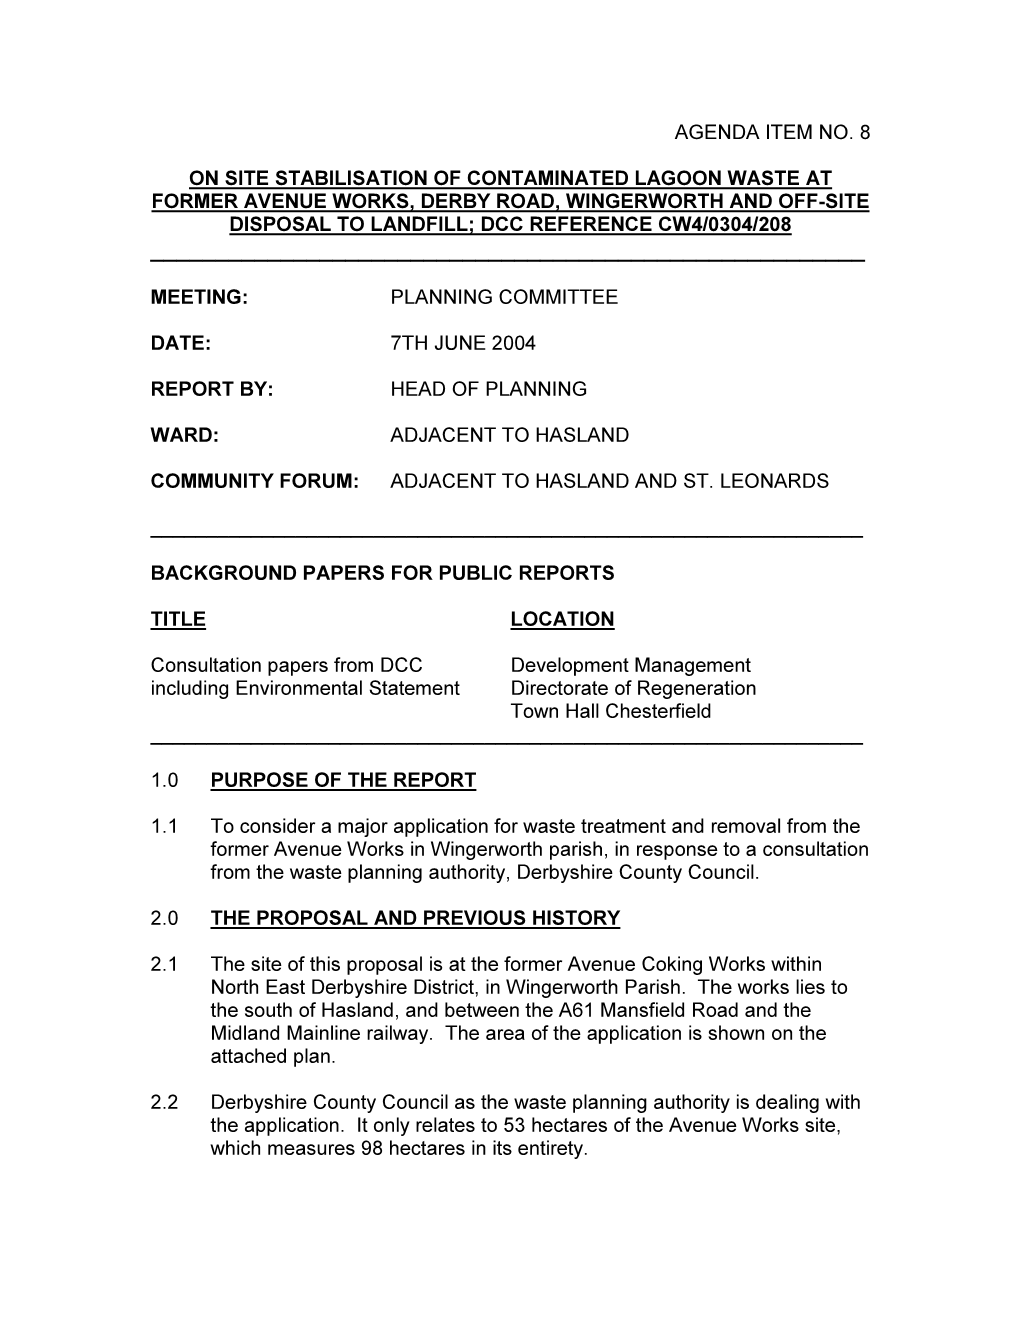 Agenda Item No. 8 on Site Stabilisation of Contaminated Lagoon Waste at Former Avenue Works, Derby Road, Wingerworth and Off-Sit